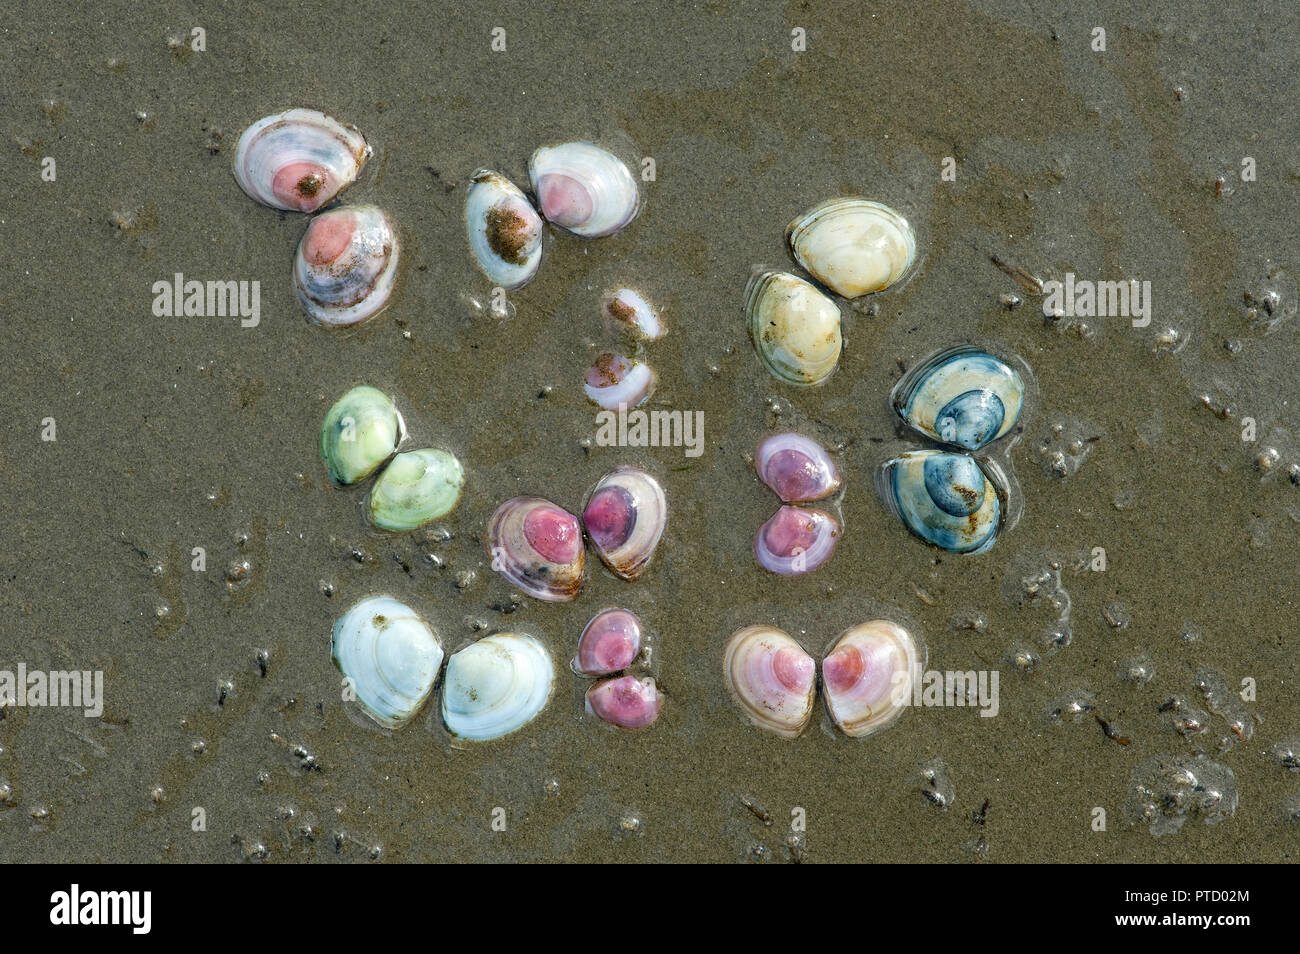 Different coloured Baltic macomas (Limecola balthica) in the sand, Wadden Sea, Schleswig-Holstein, Germany Stock Photo